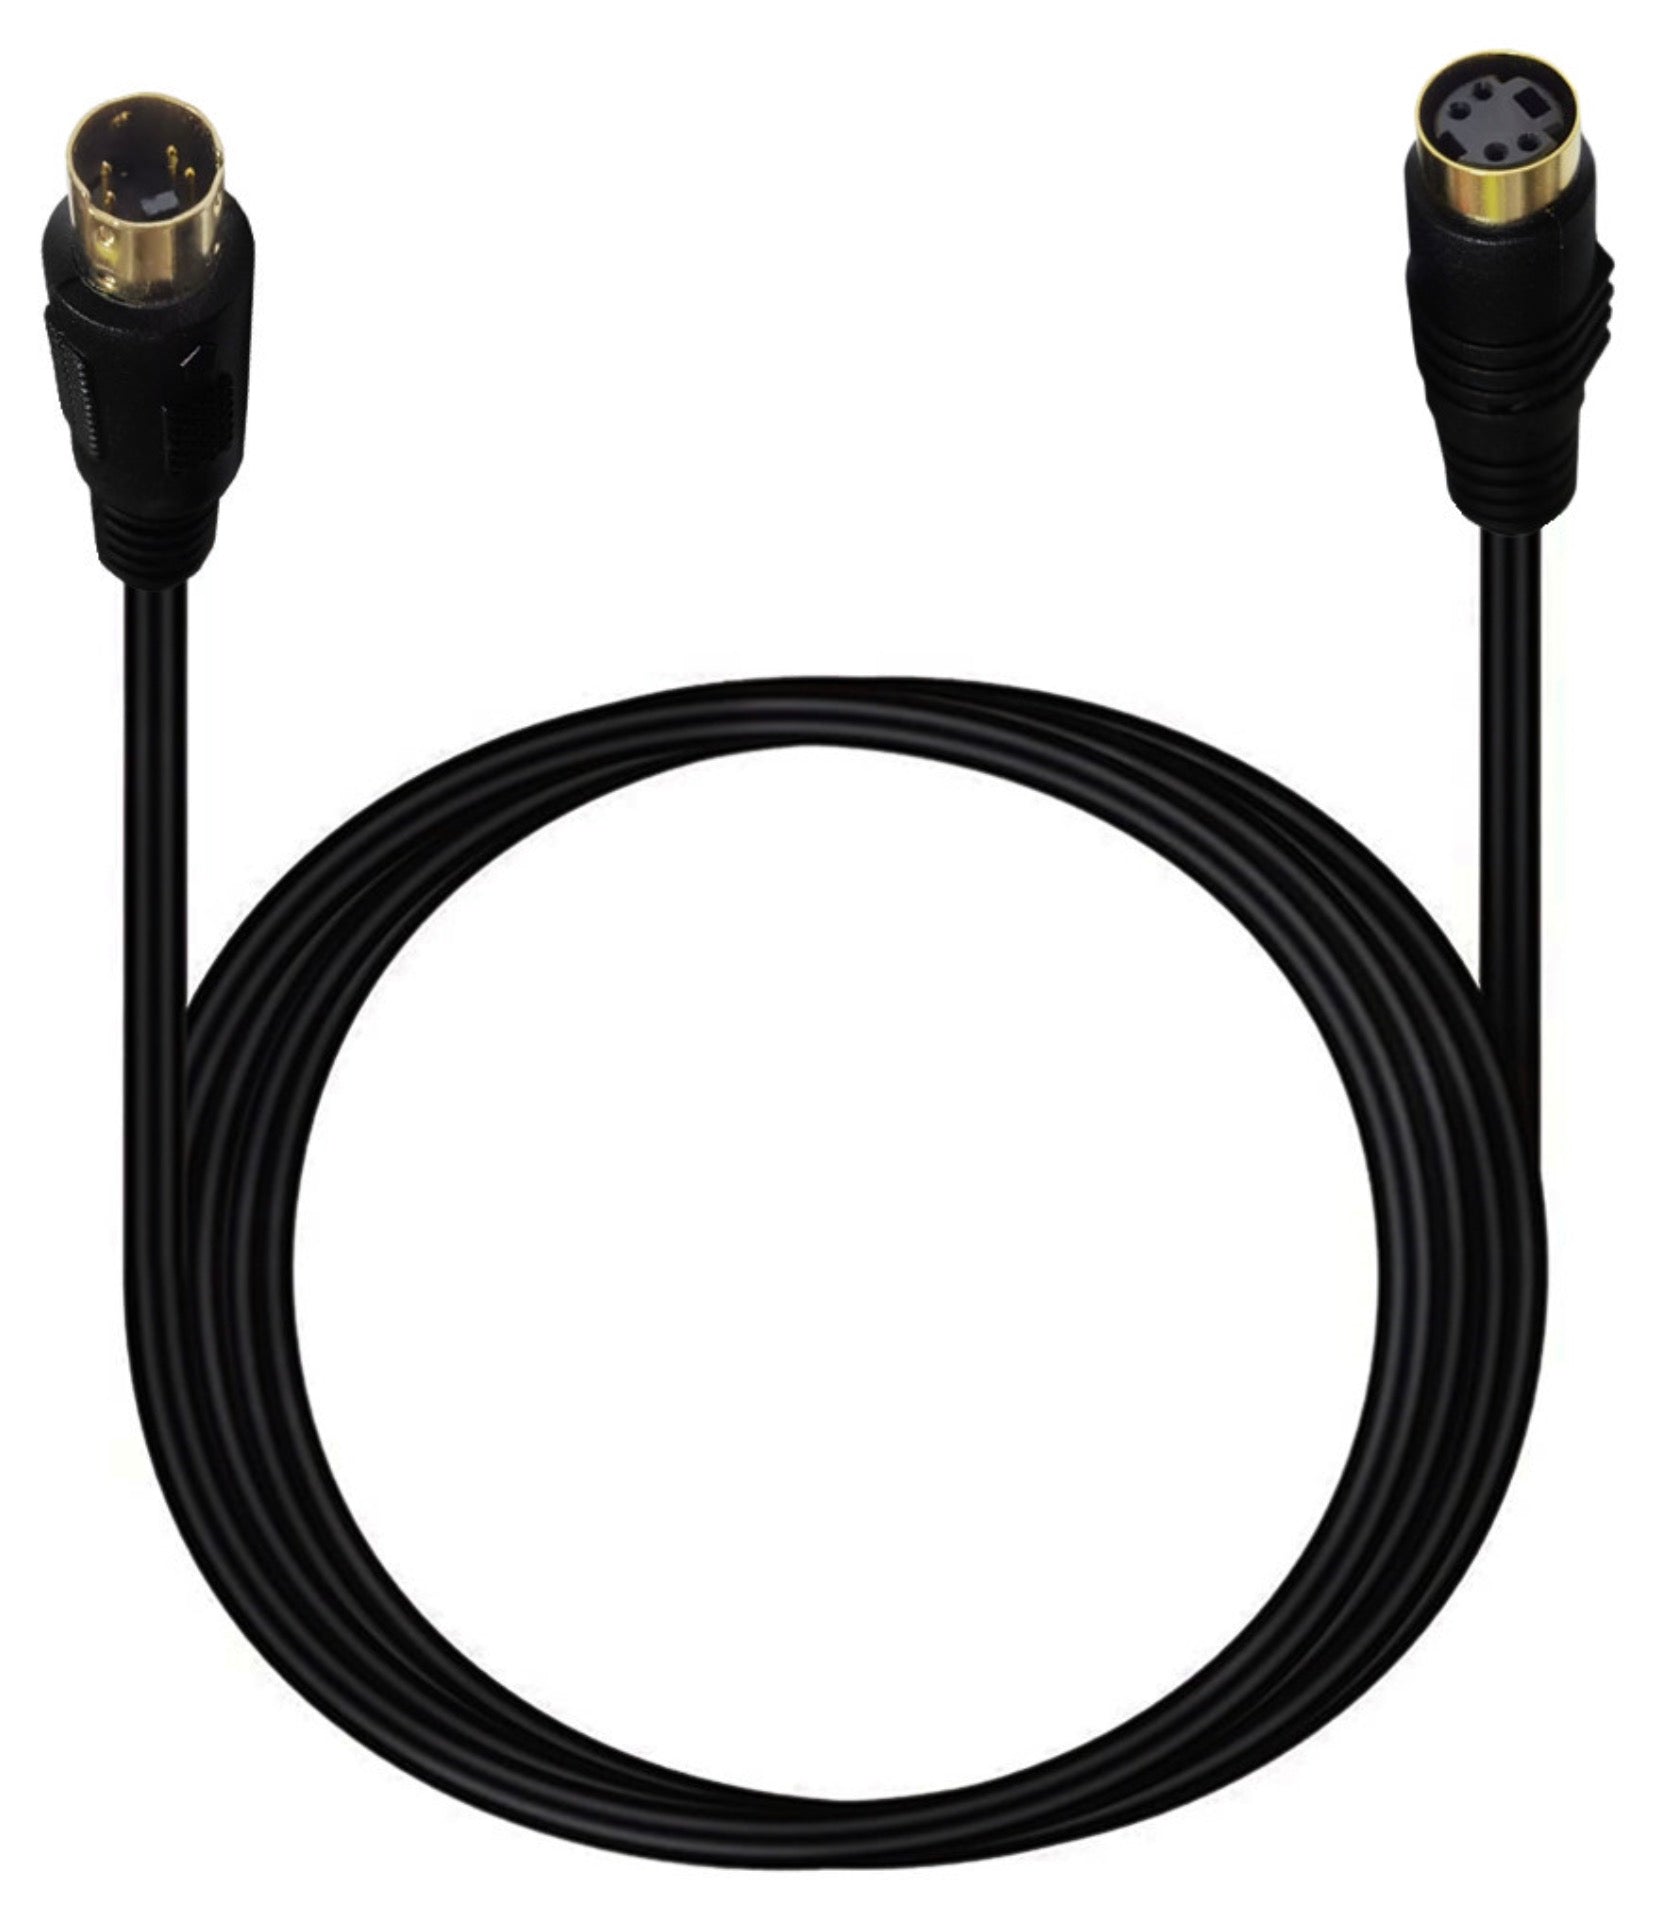 S-Video 4 Pin Male to Female Audio Cable For Home Theater, DSS receivers, VCRs, DVRs/PVRs, Camcorders, DVD Players.